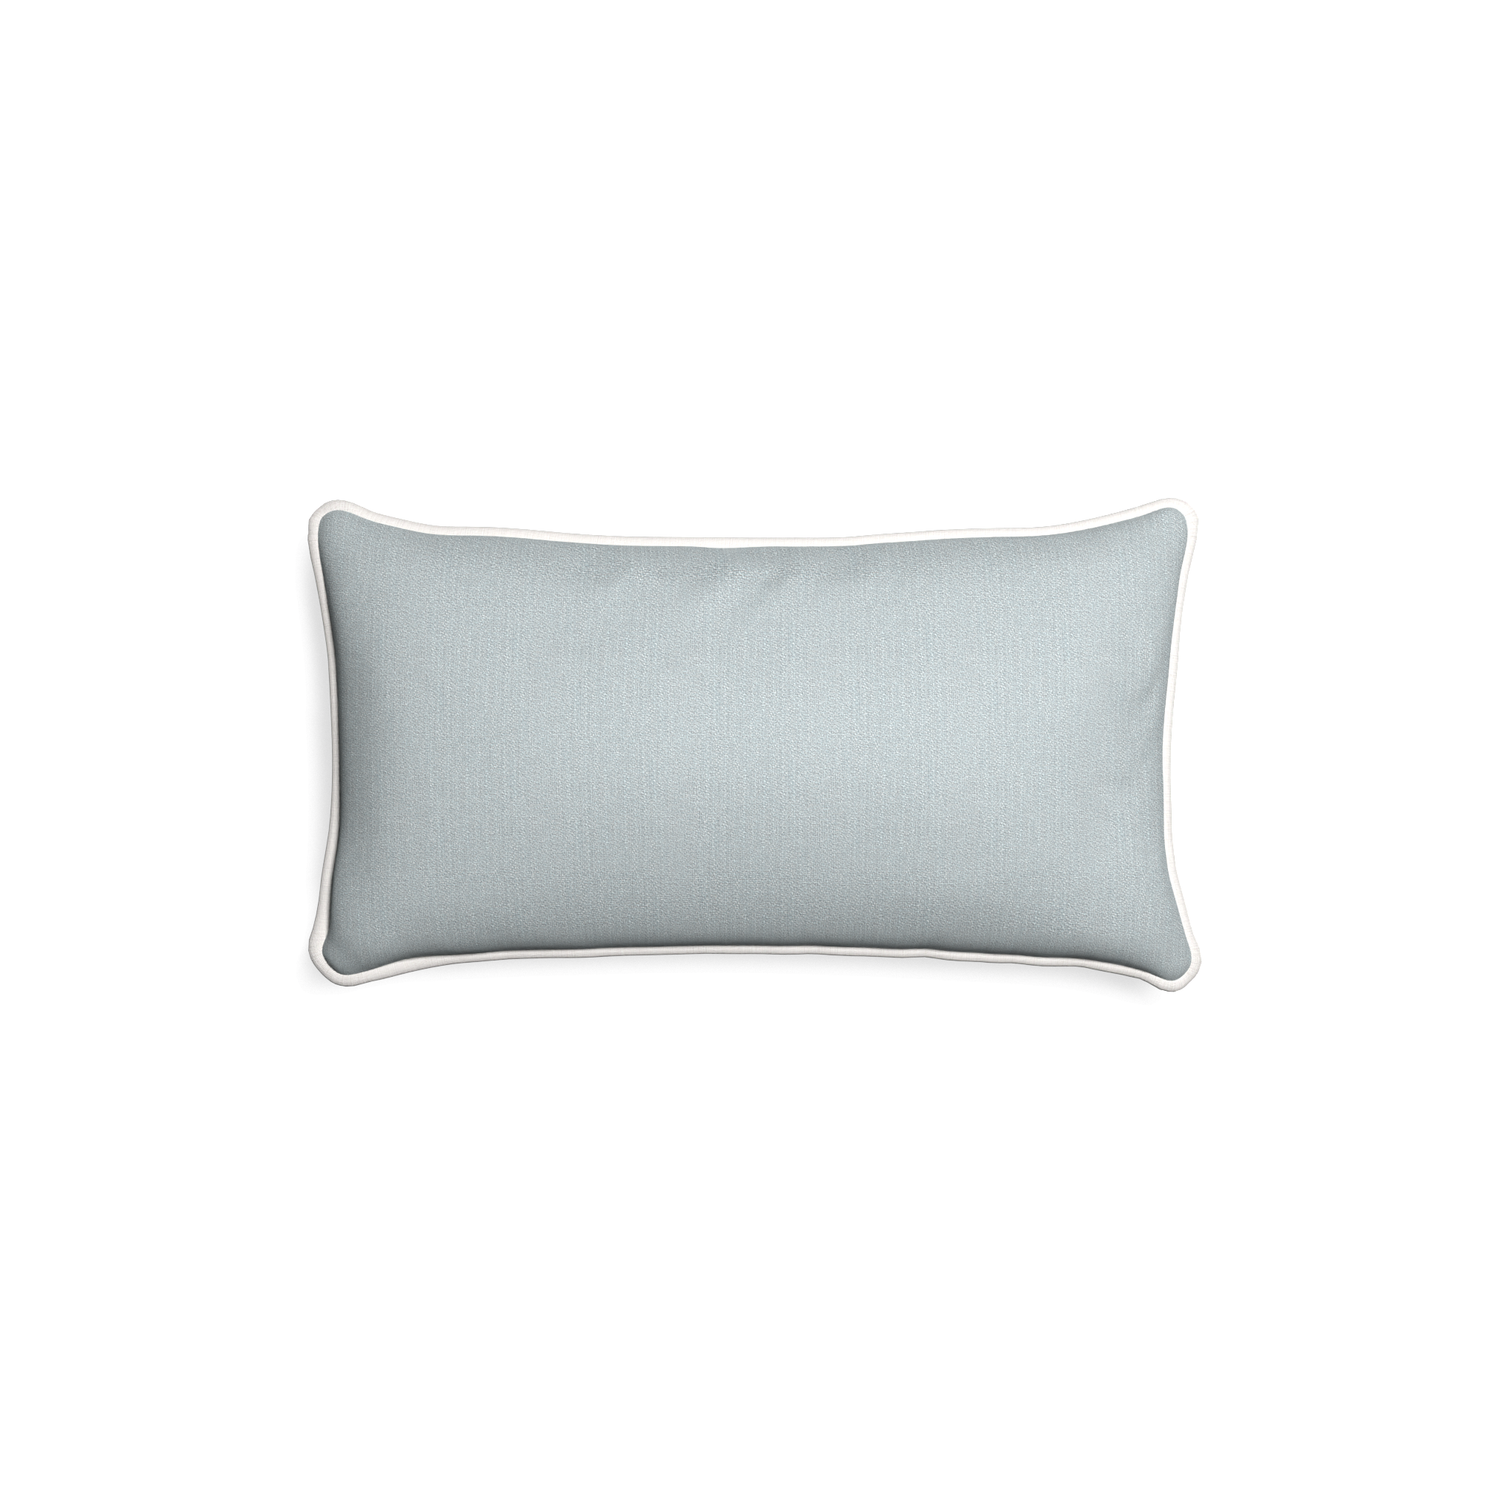 Petite-lumbar sea custom grey bluepillow with snow piping on white background